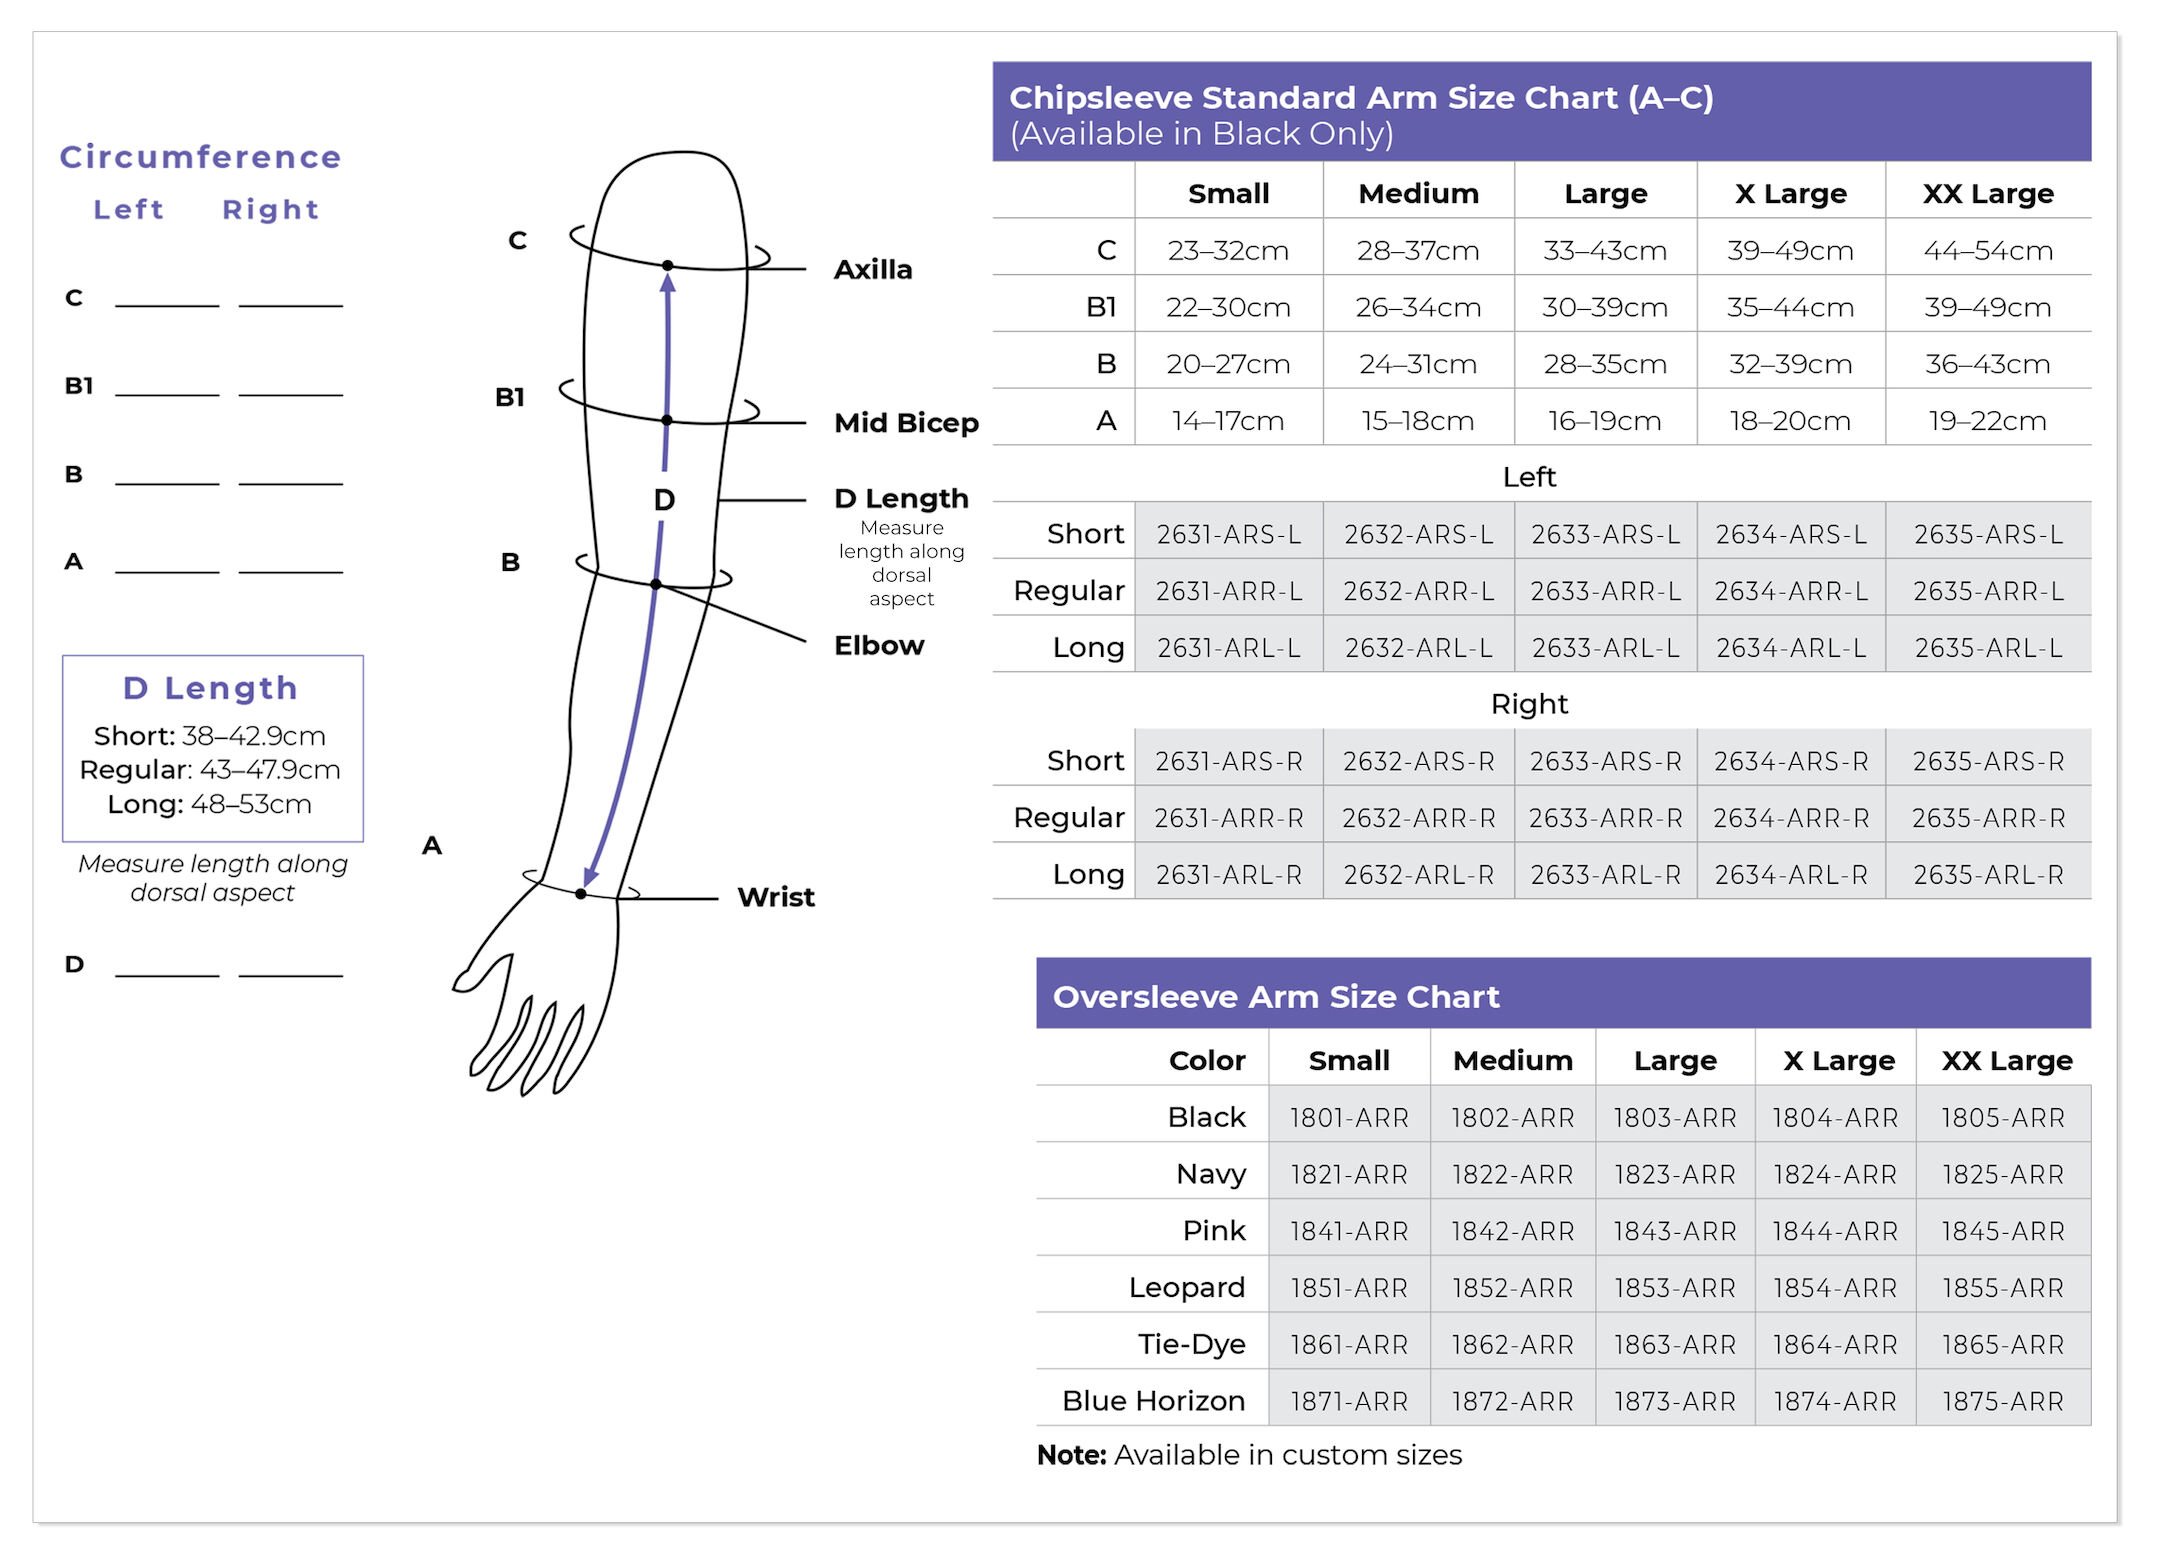 Sigvaris Chipsleeve Arm Size Chart